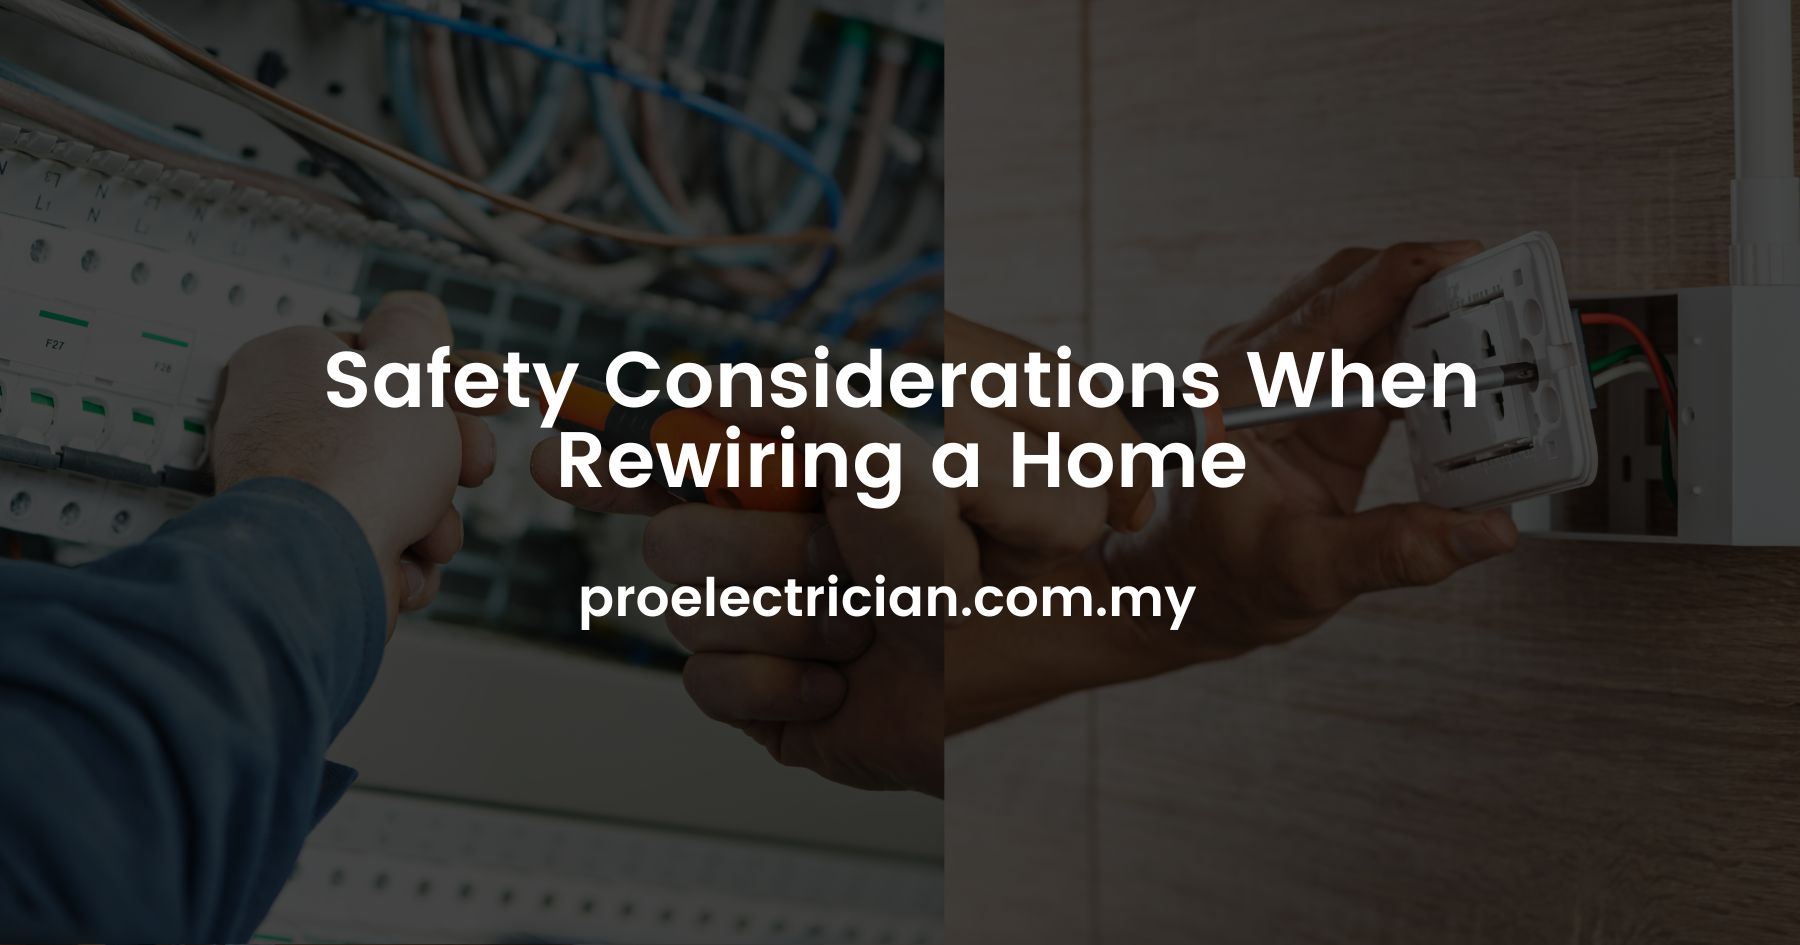 Safety Considerations When Rewiring a Home